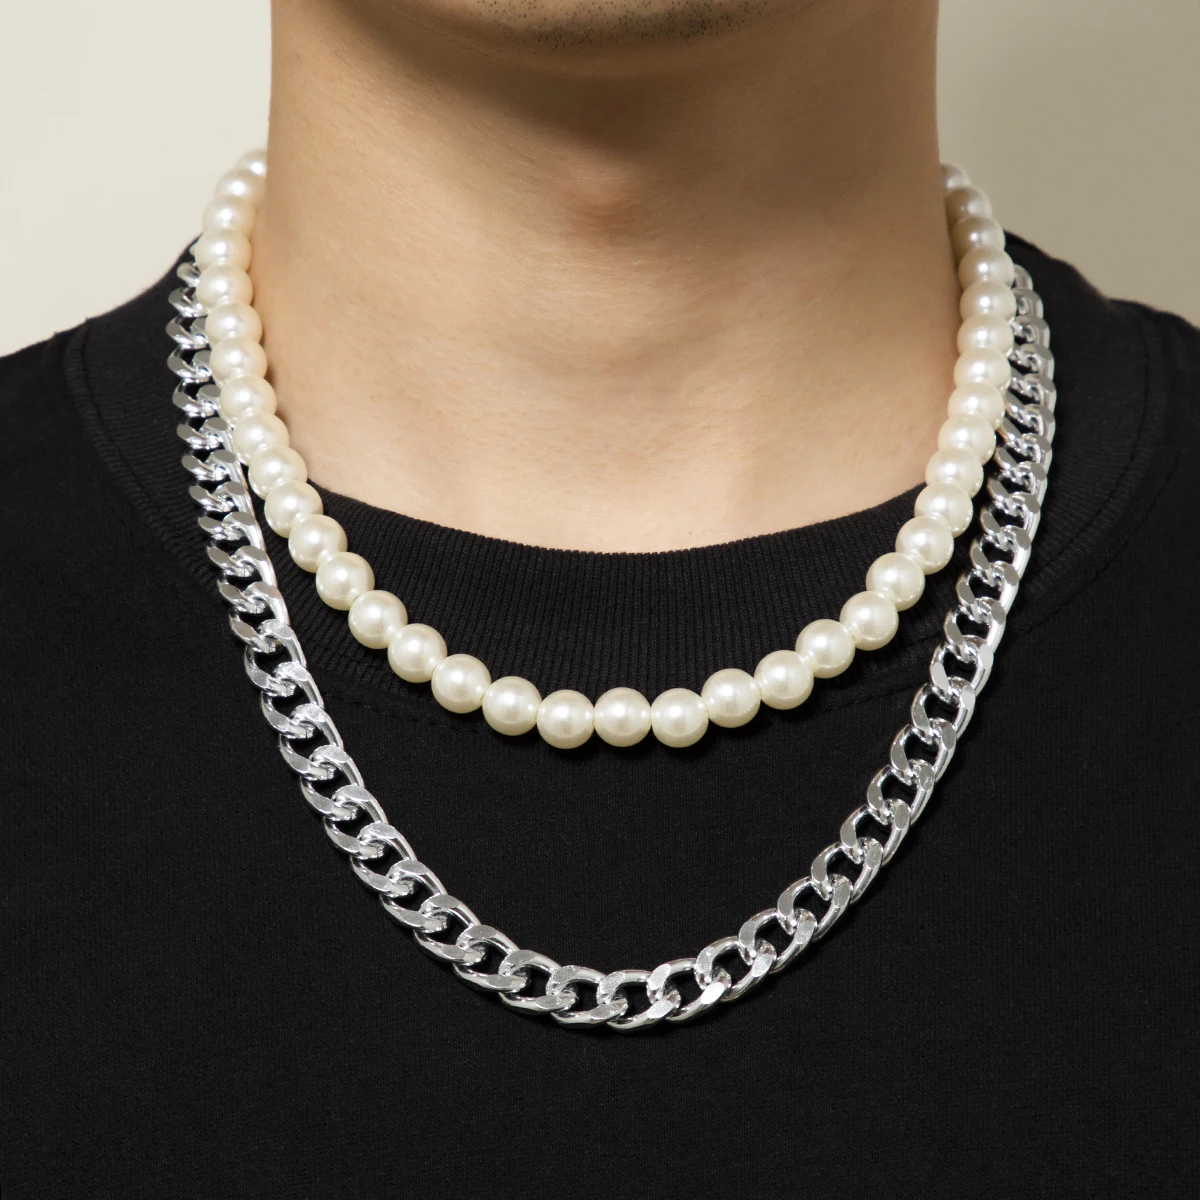 

KunJoe Punk Imitation Pearls Bead Choker Necklace for Men Hip-Hop Layered Silver Color Cuban Chunky Chain Long Necklace Jewelry